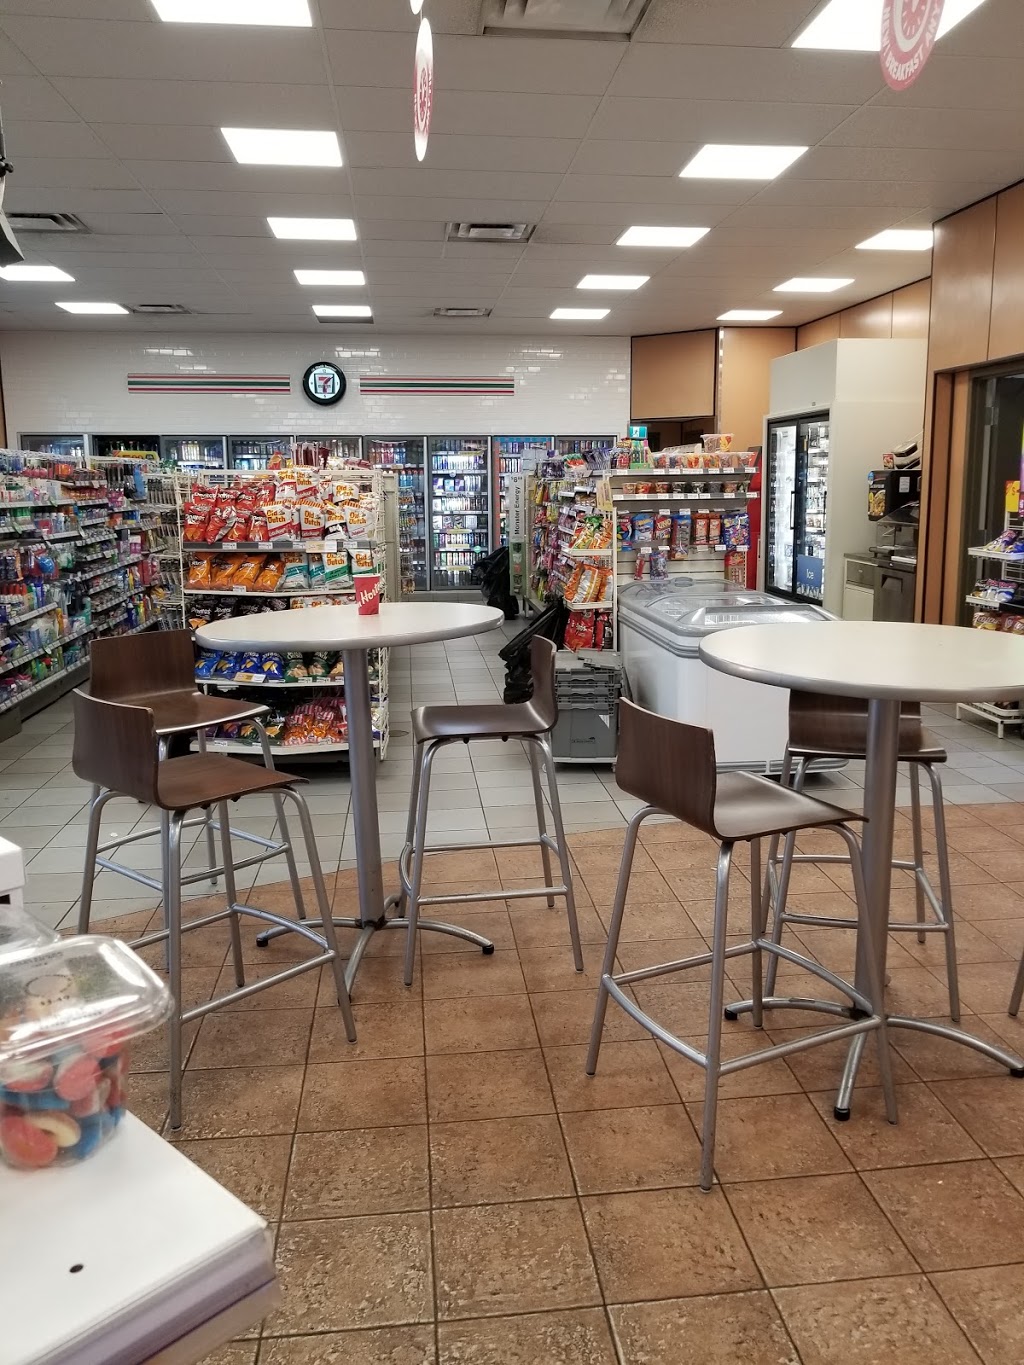 7/11 & tim Hortons Gas & Esso Gas Station | cafe | 16430 87 Ave NW, Edmonton, AB T5R 4H2, Canada